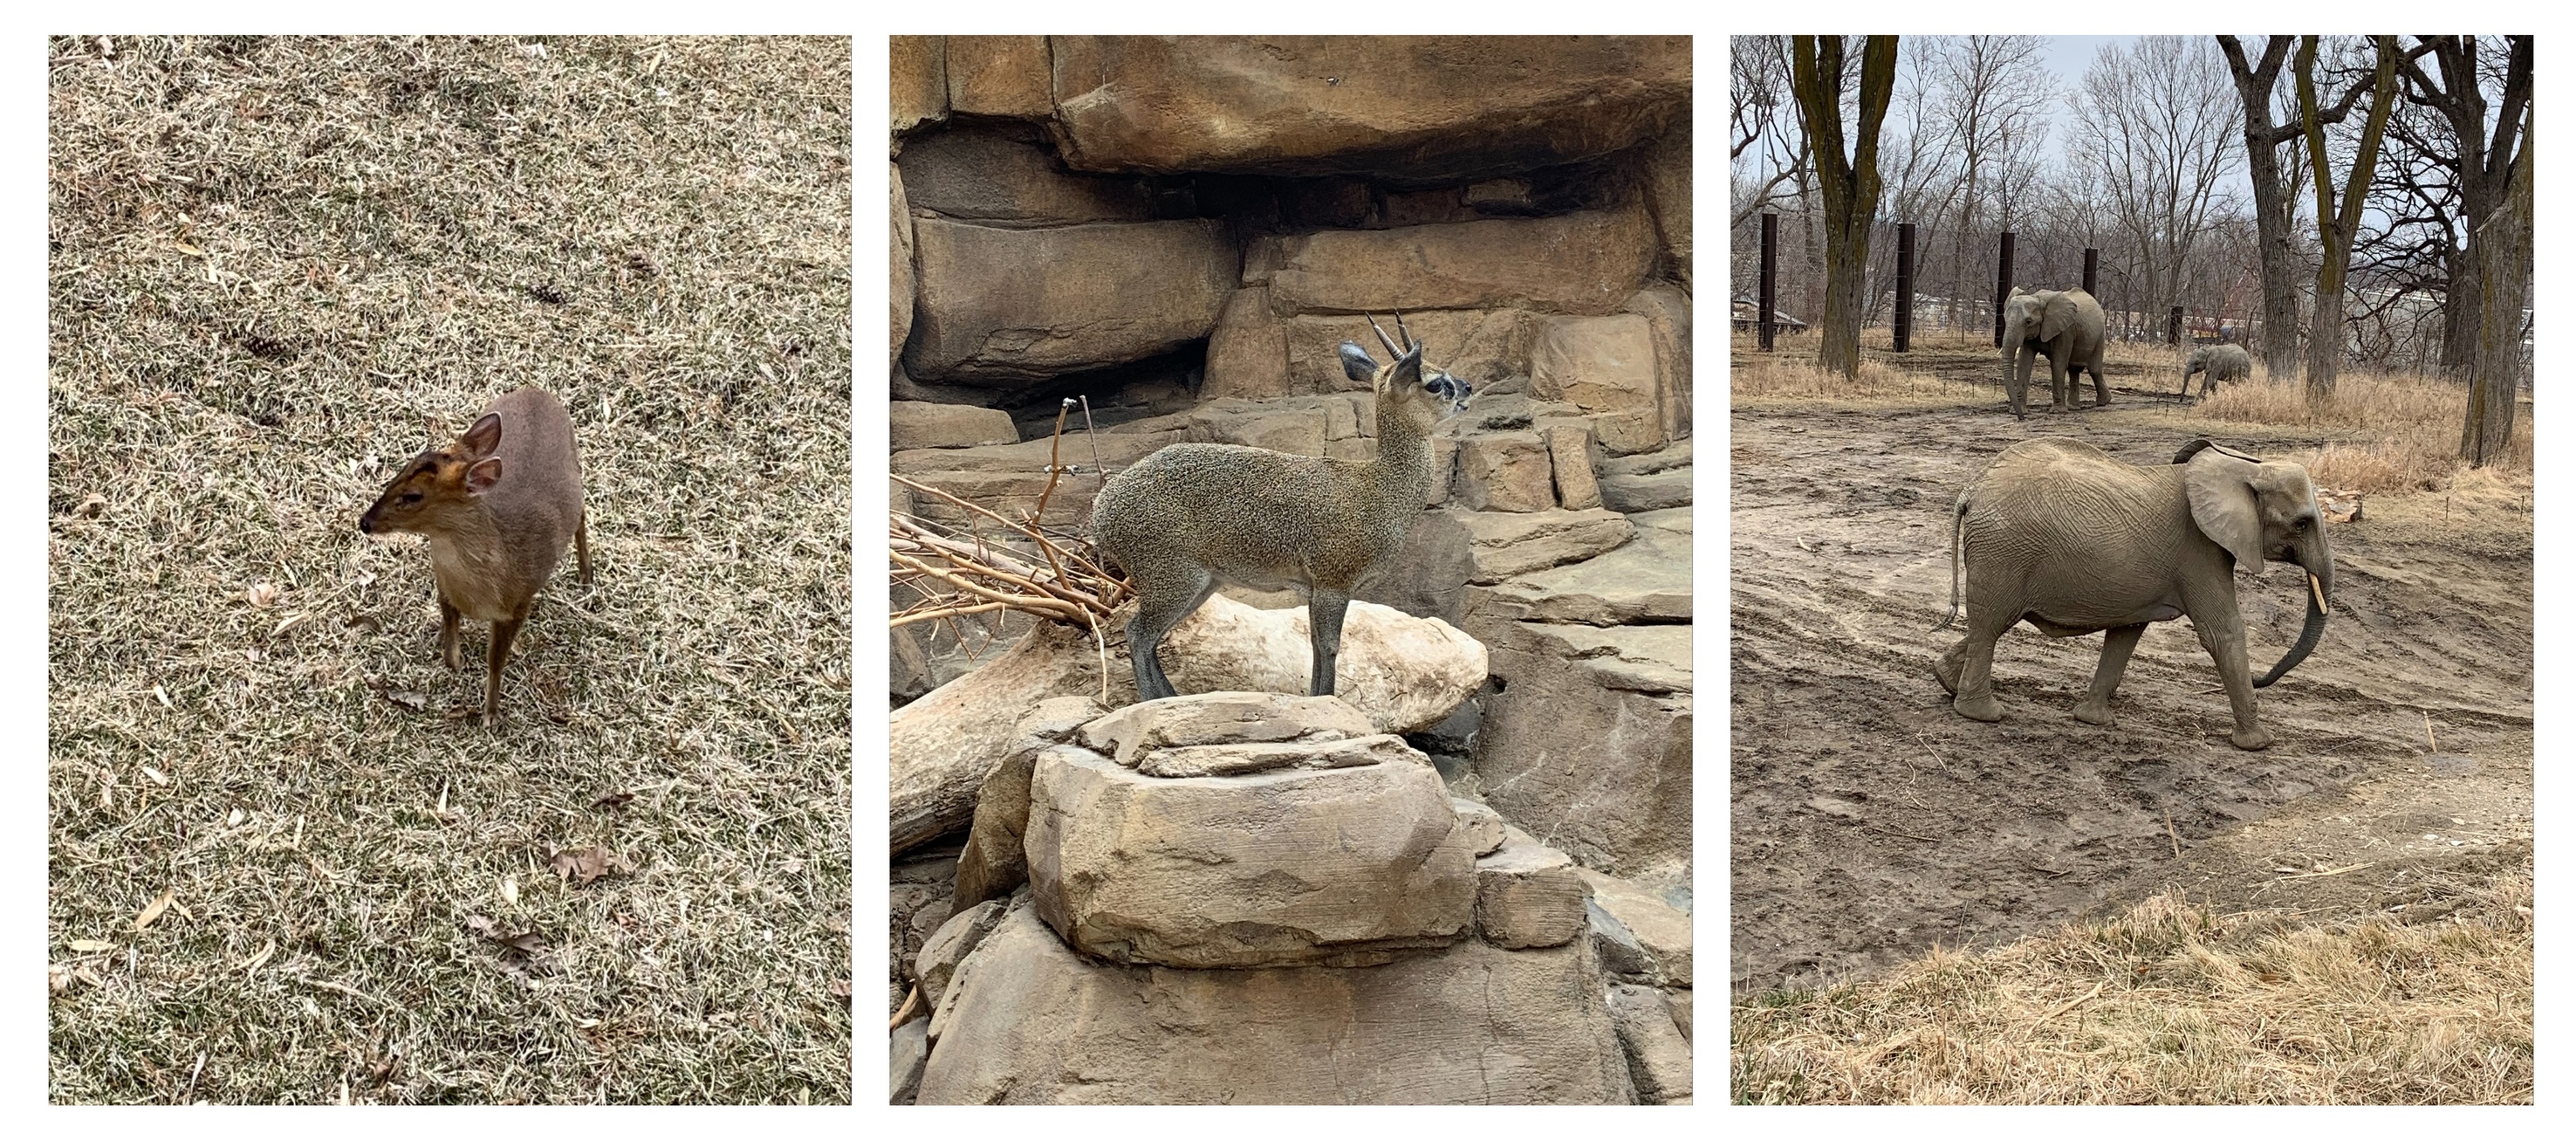 Collection of images showing some mammals from the Henrly Doorly Zoo.